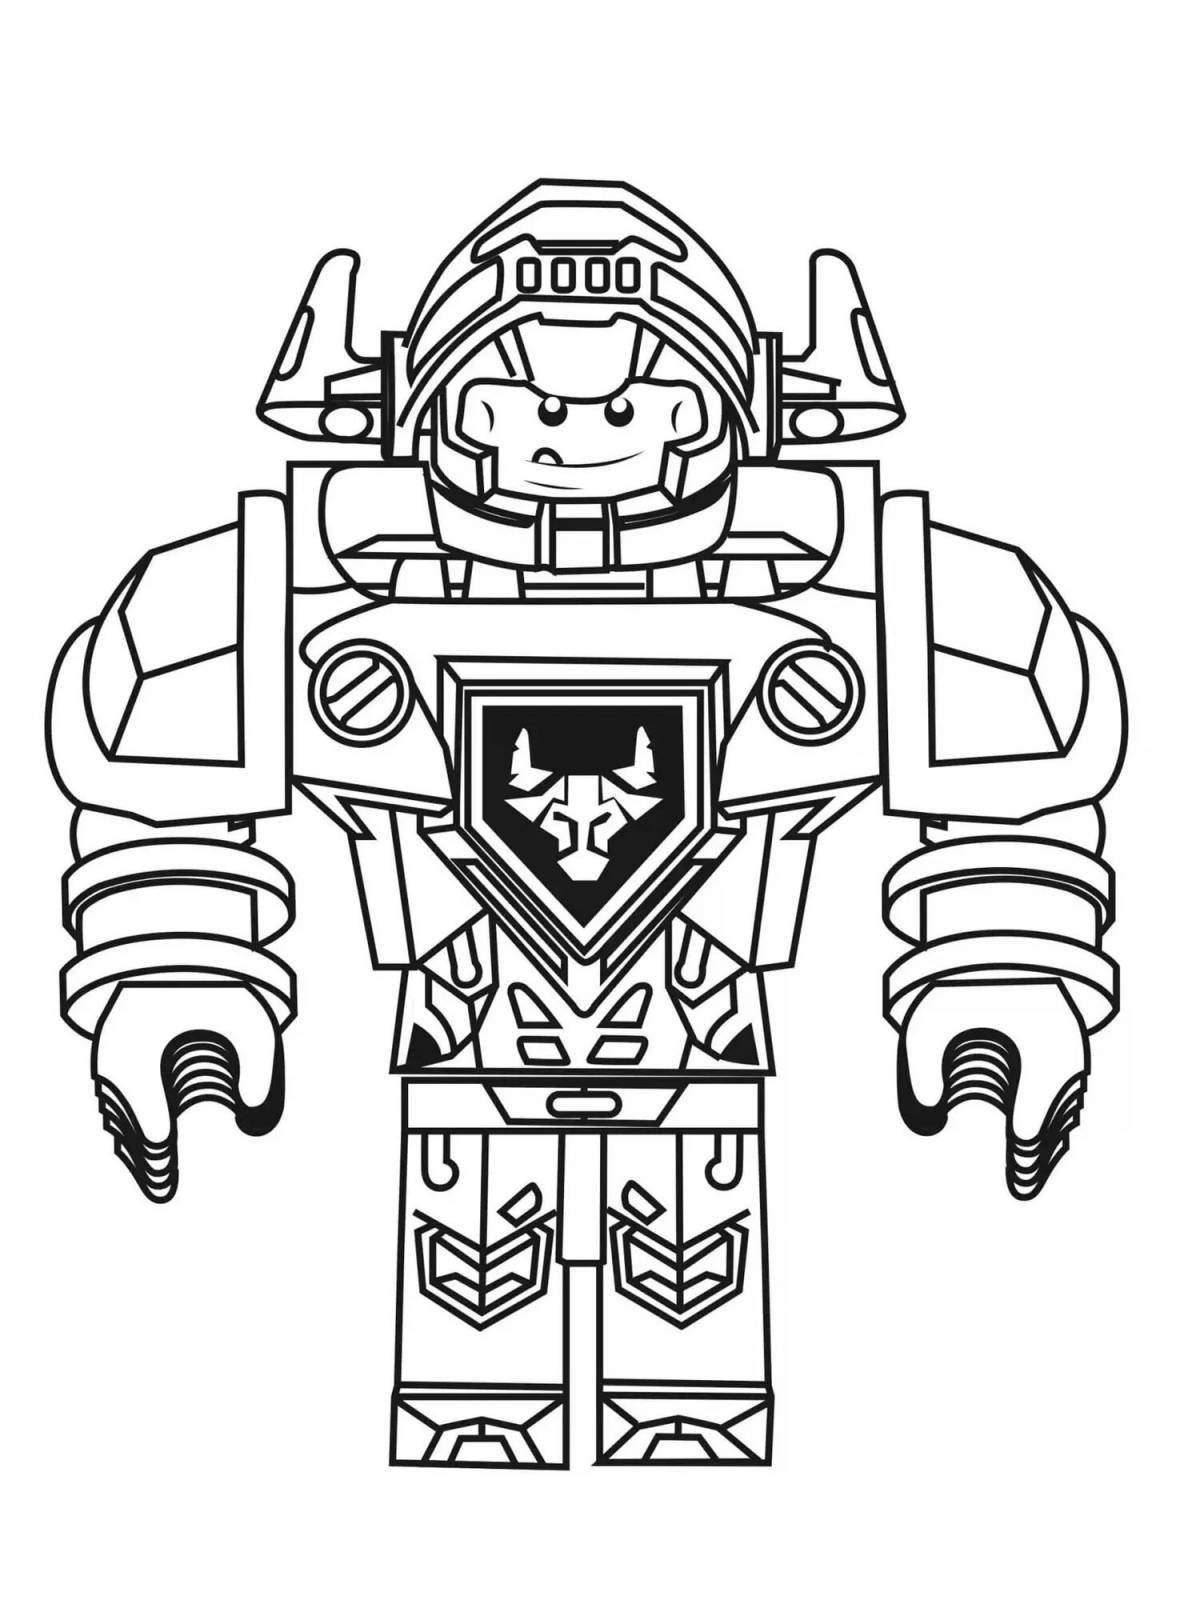 Playful lego robot coloring page